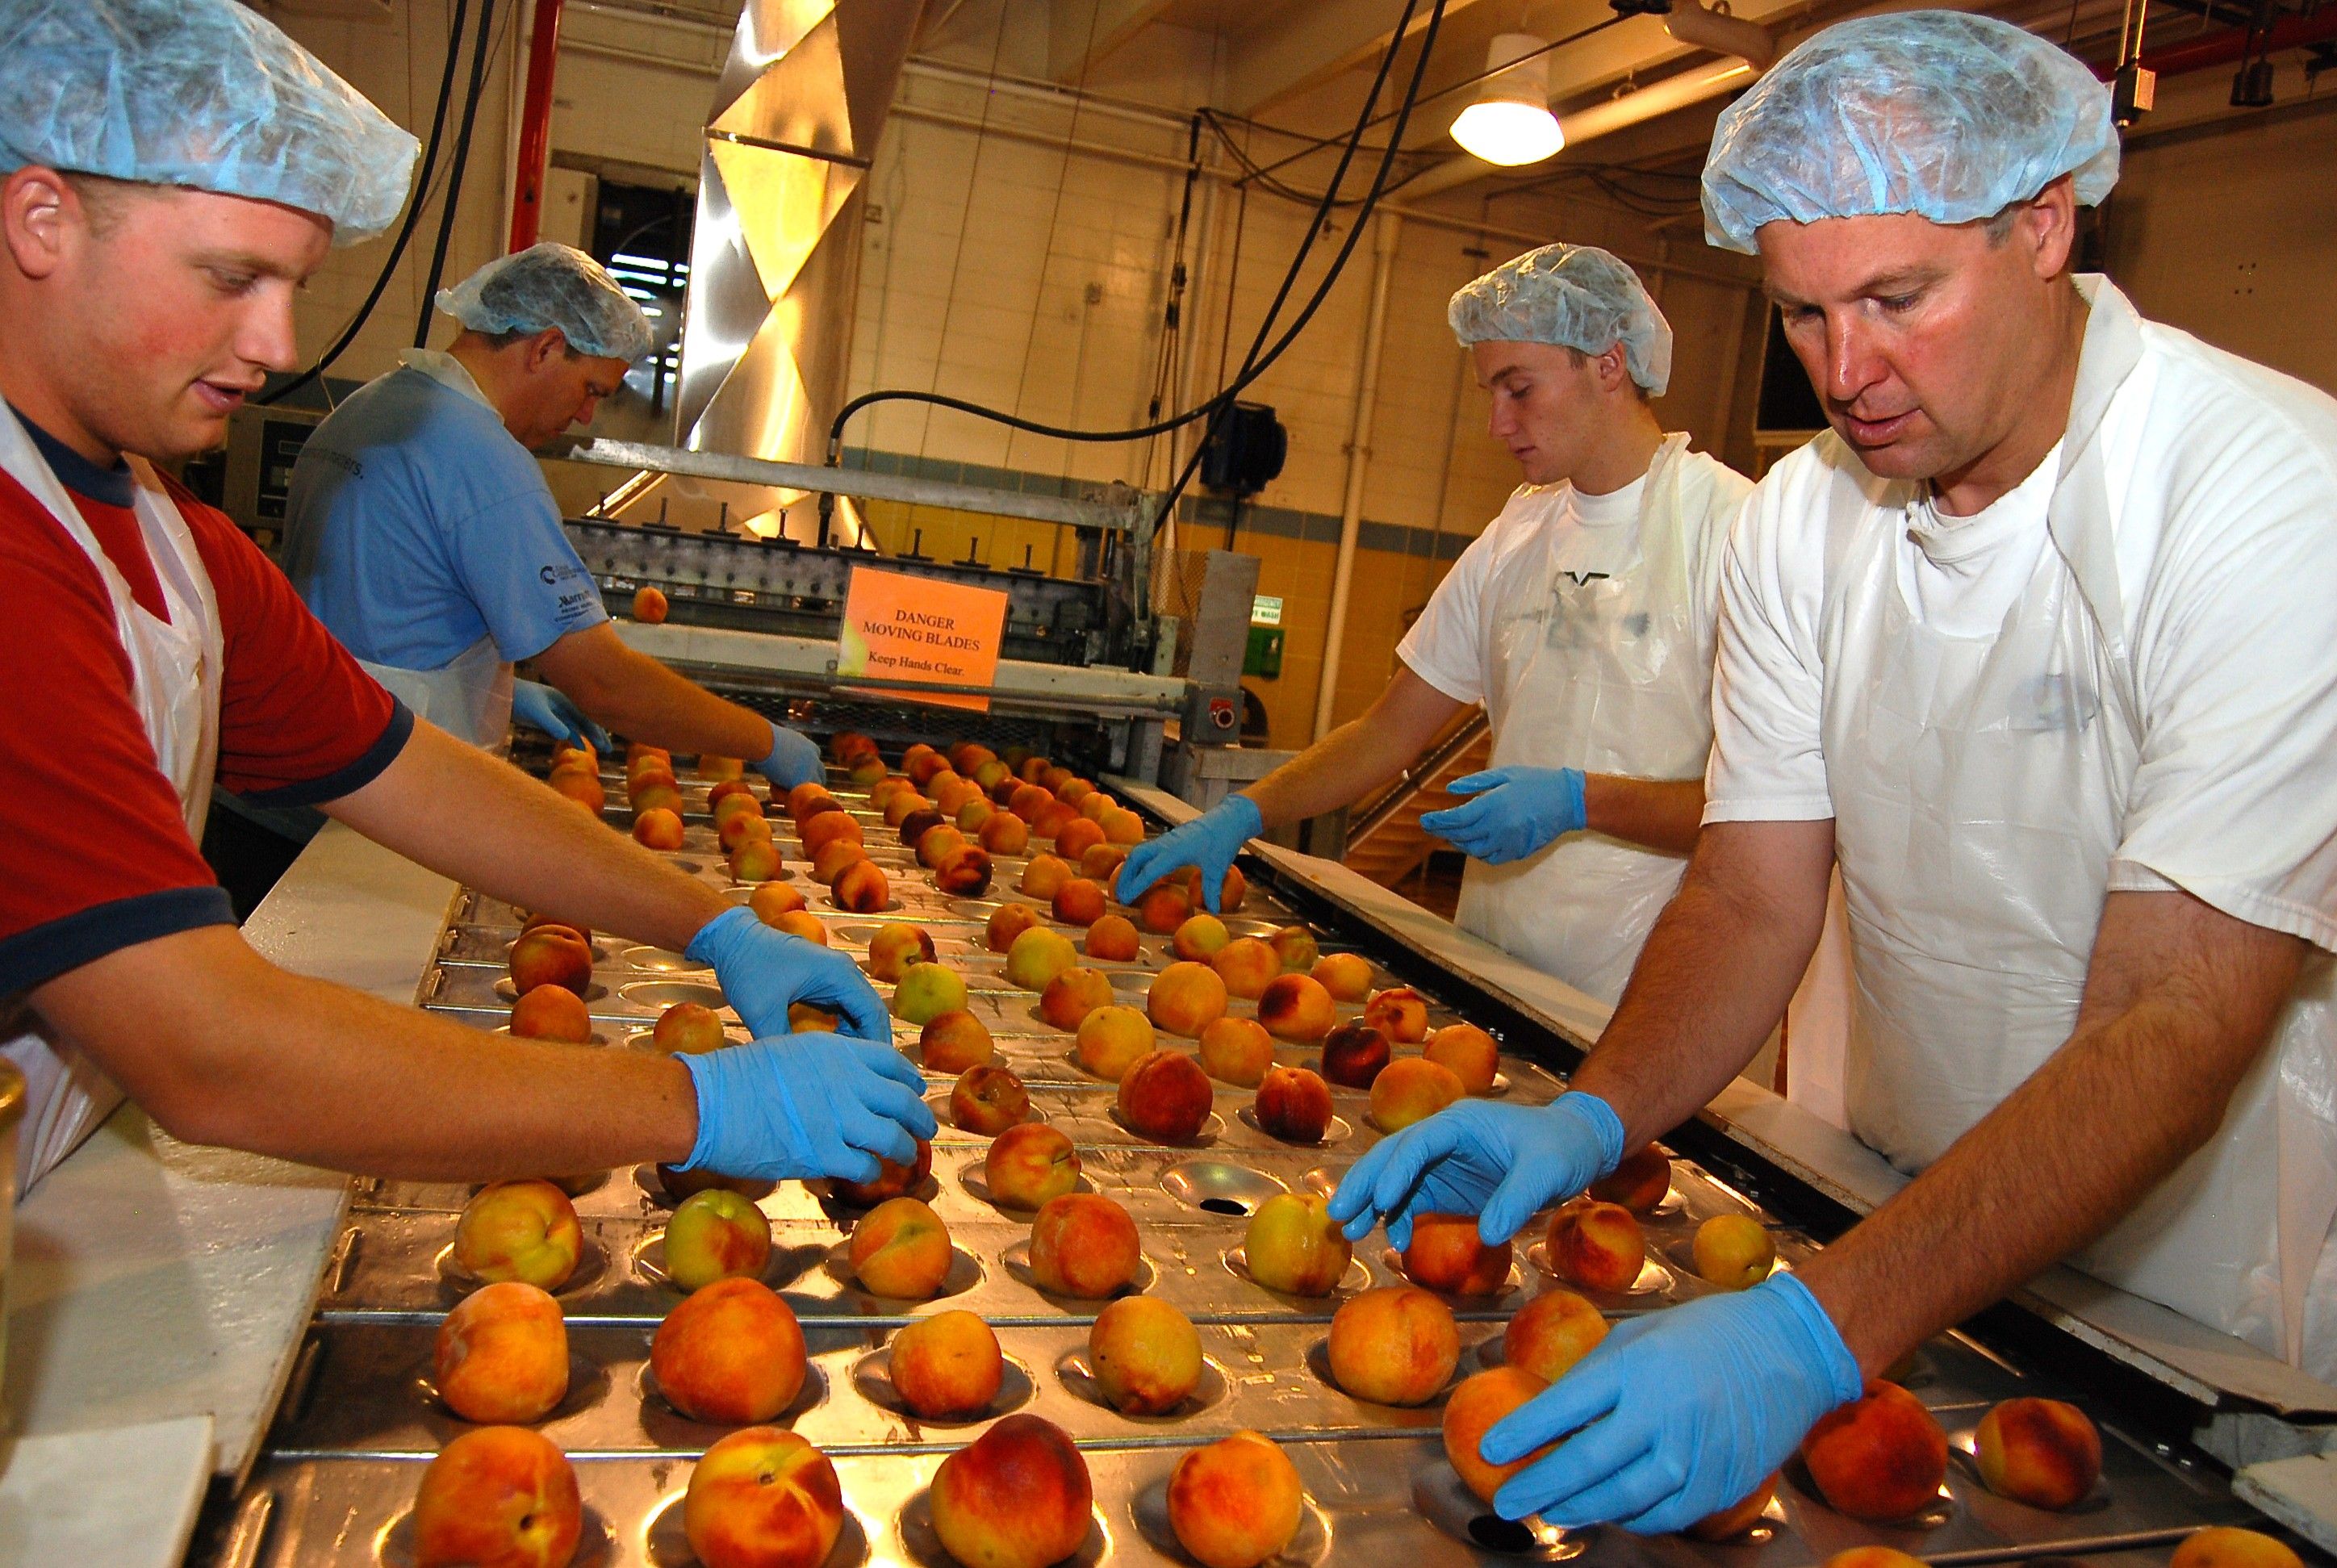 Four men sorting peaches on the production line in Welfare Square.